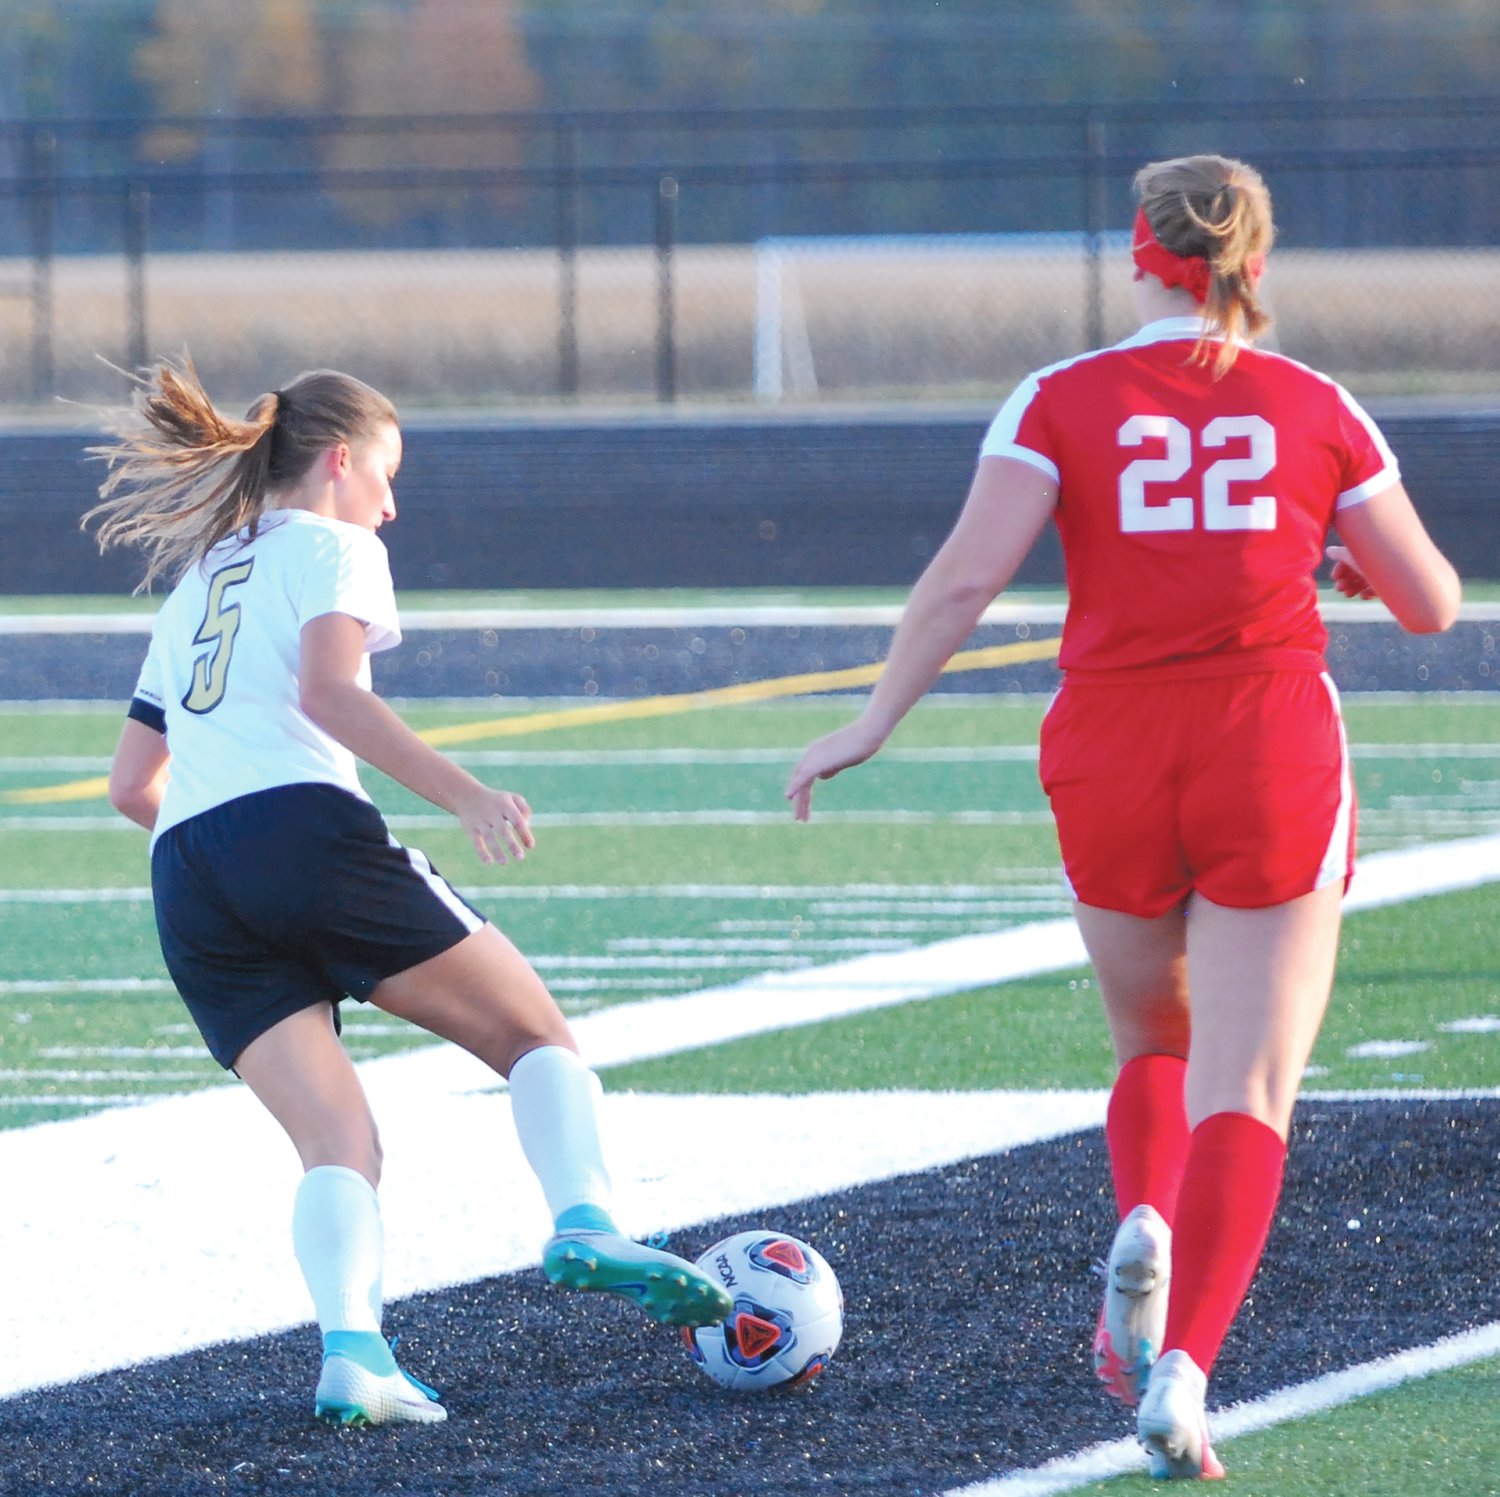 Southmont's Jordan Stanley chases down the ball. The junior scored the go-ahead goal for the Mounties in the first half.